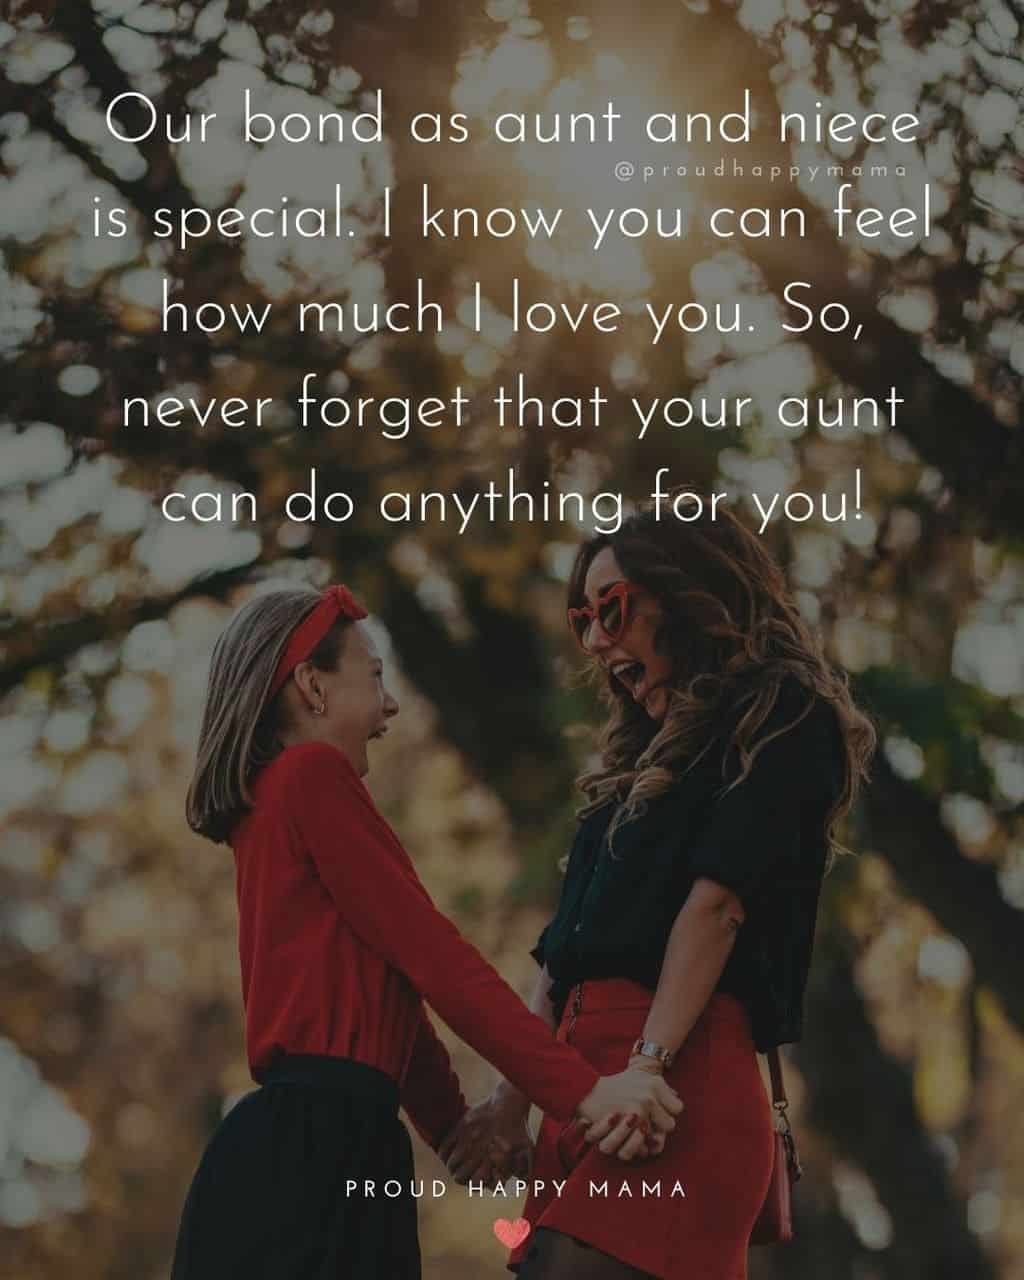 Niece Quotes - Our bond as aunt and niece is special. I know you can feel how much I love you. So, never forget that your aunt can do anything for you